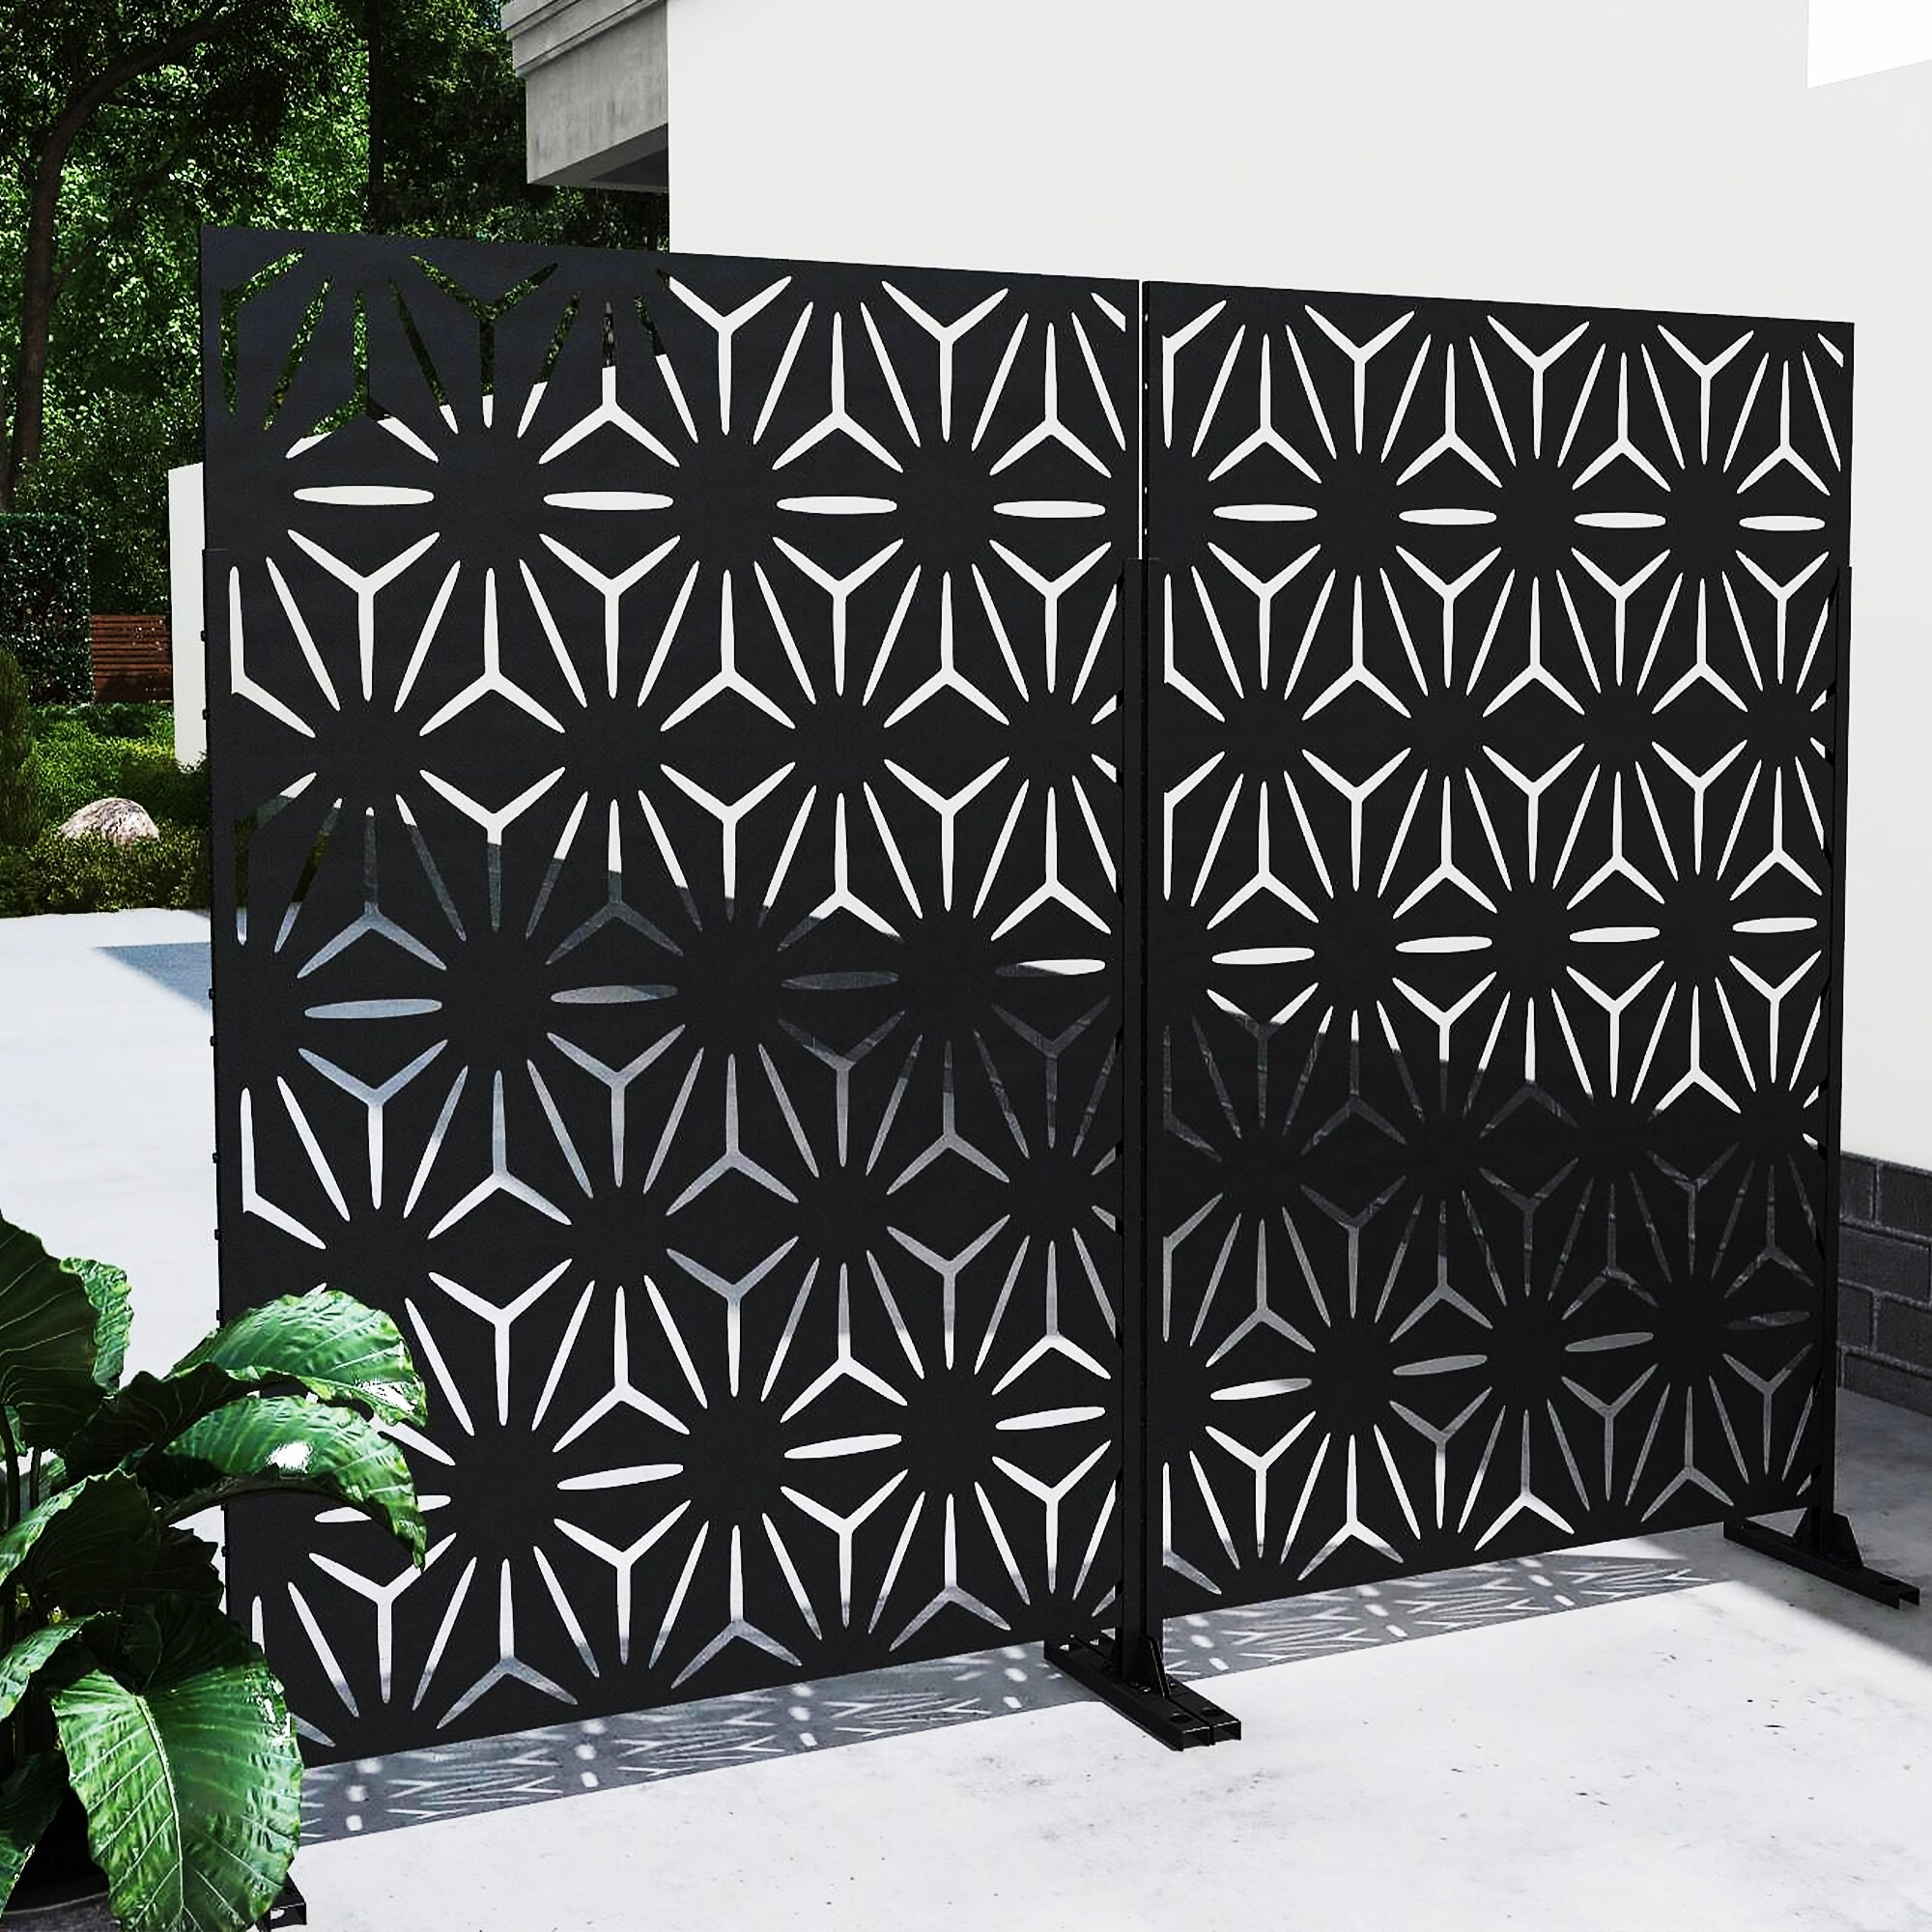 https://ak1.ostkcdn.com/images/products/is/images/direct/7dd5c744721d0c80d31783c4e6861bdec75d2d3d/Free-Standing-Star-Black-Decorative-Outdoor-Privacy-Screen%2C-47%22-L-x-76%22-H.jpg